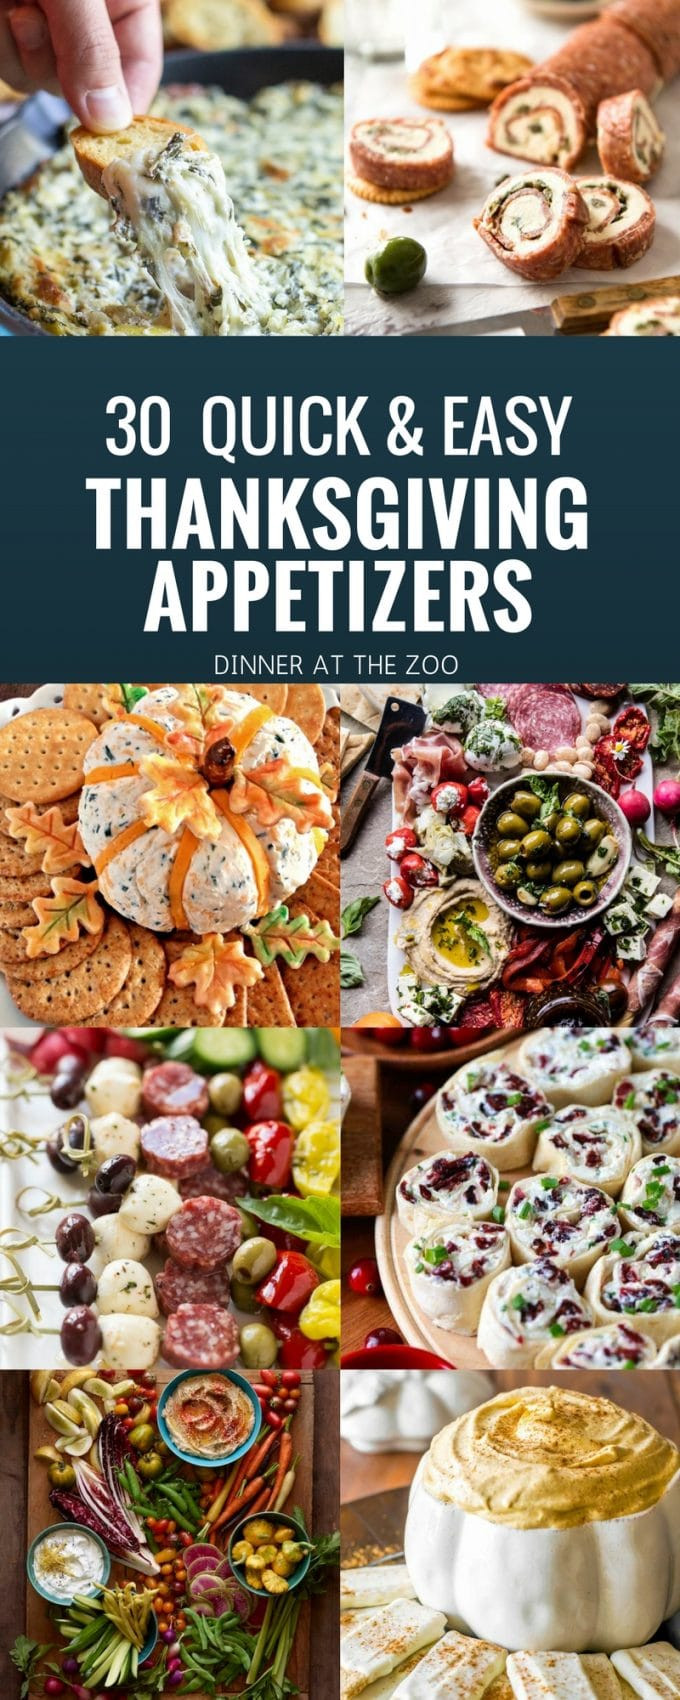 Easy Thanksgiving Appetizers
 30 Thanksgiving Appetizer Recipes Dinner at the Zoo